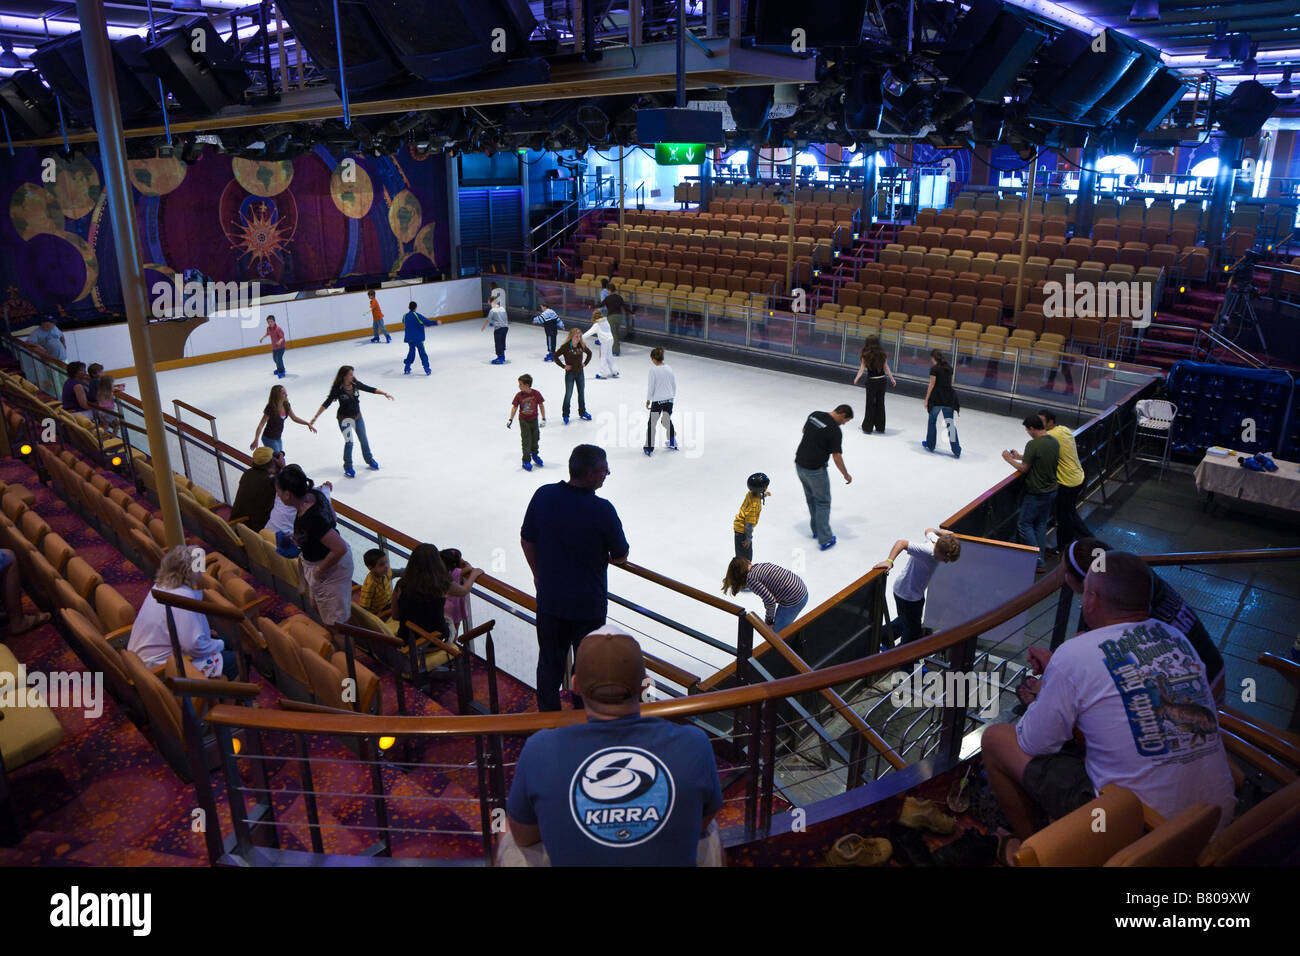 Cruise passengers ice skating during open skate session on Royal Caribbean Navigator of the Seas cruise ship Stock Photo